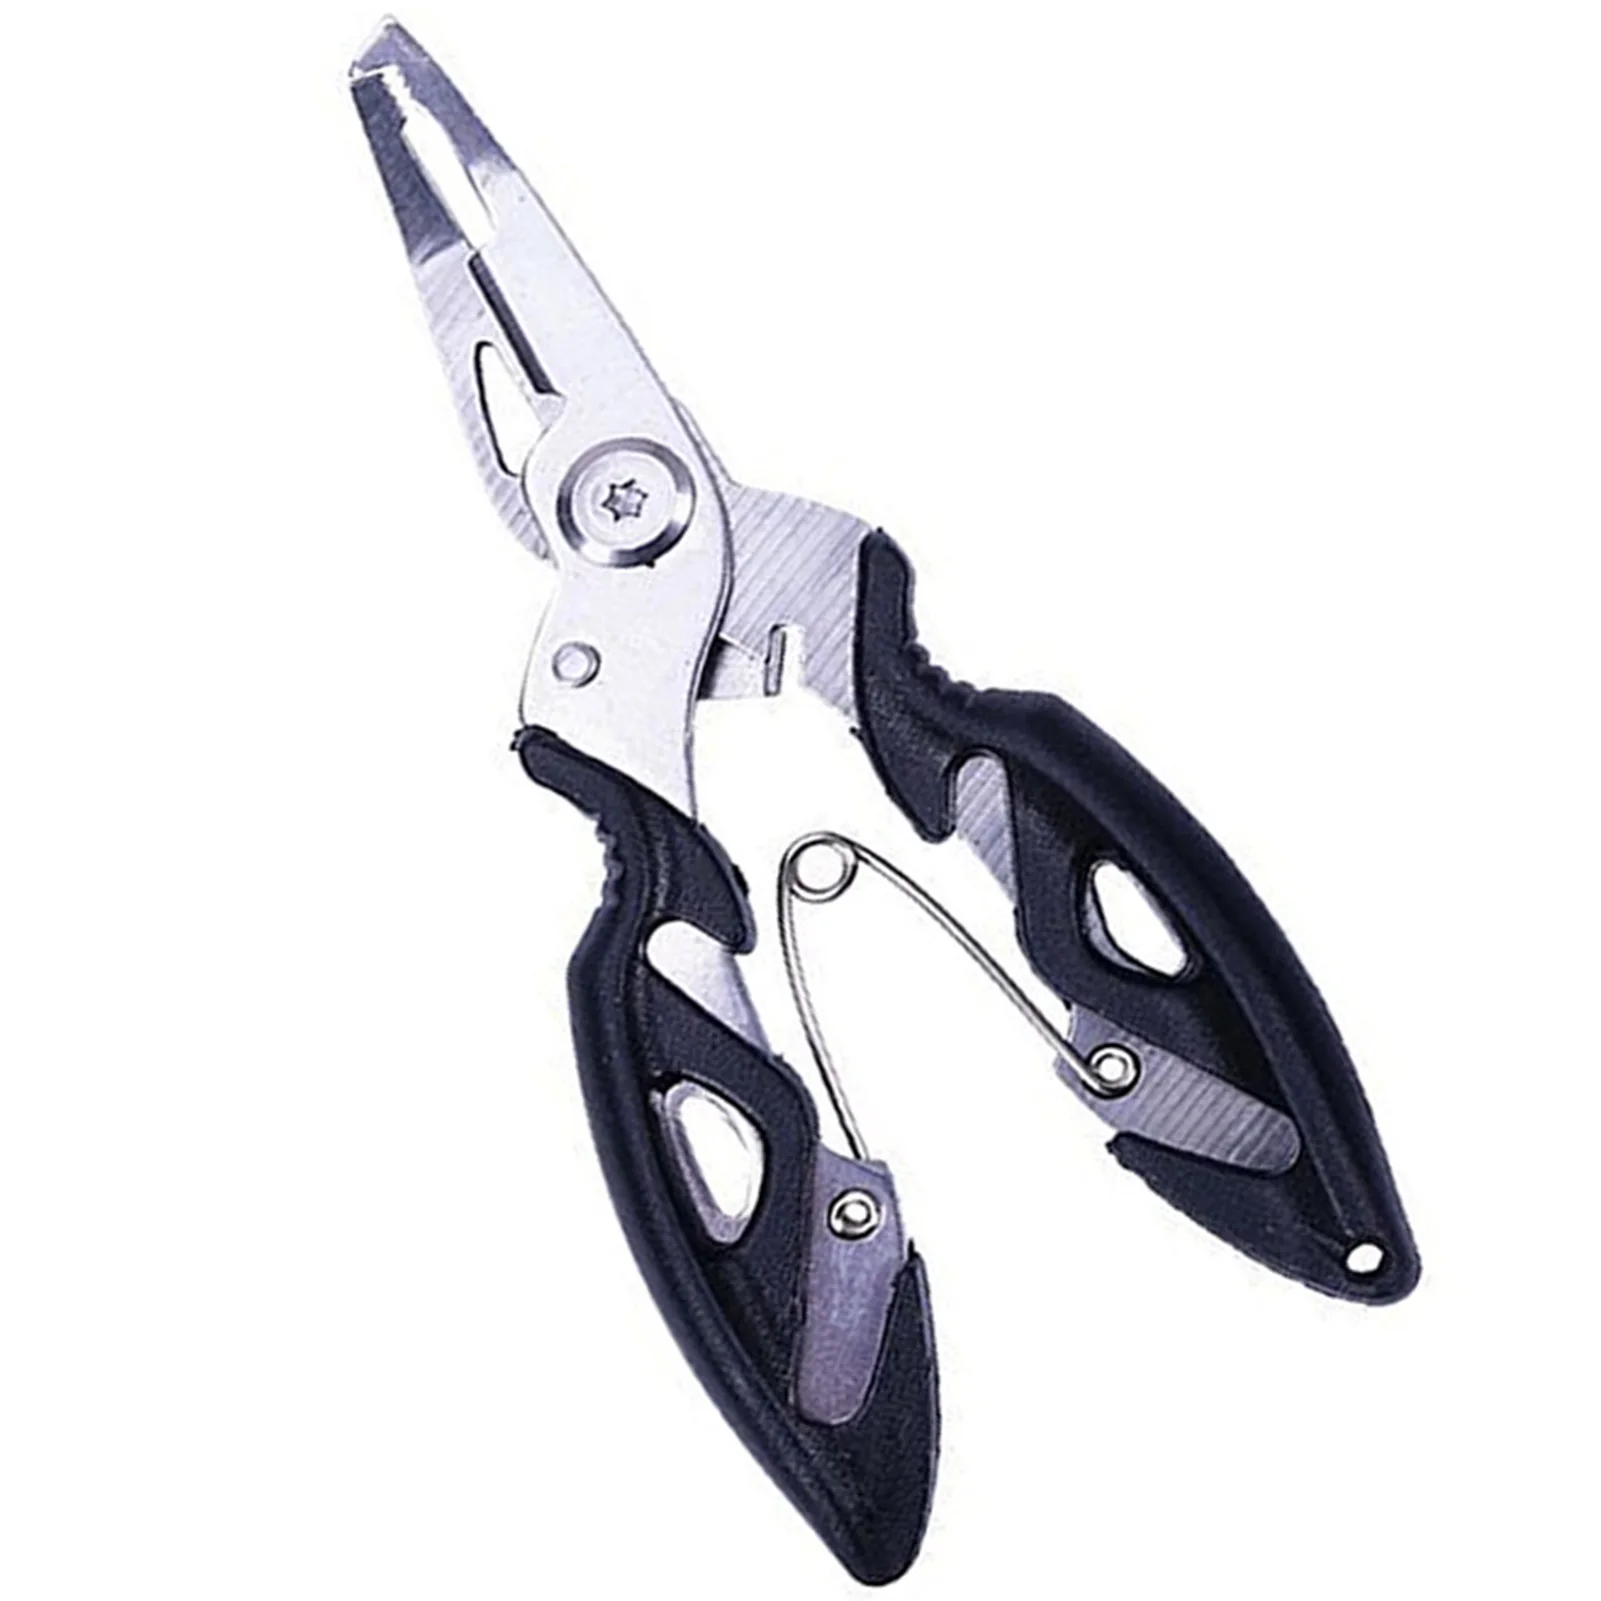 

Stainless Steel Curved Mouth Fishing Pliers Multifunctional Luya Pliers Fishing Line Scissors Fishing Tools Hook Remover